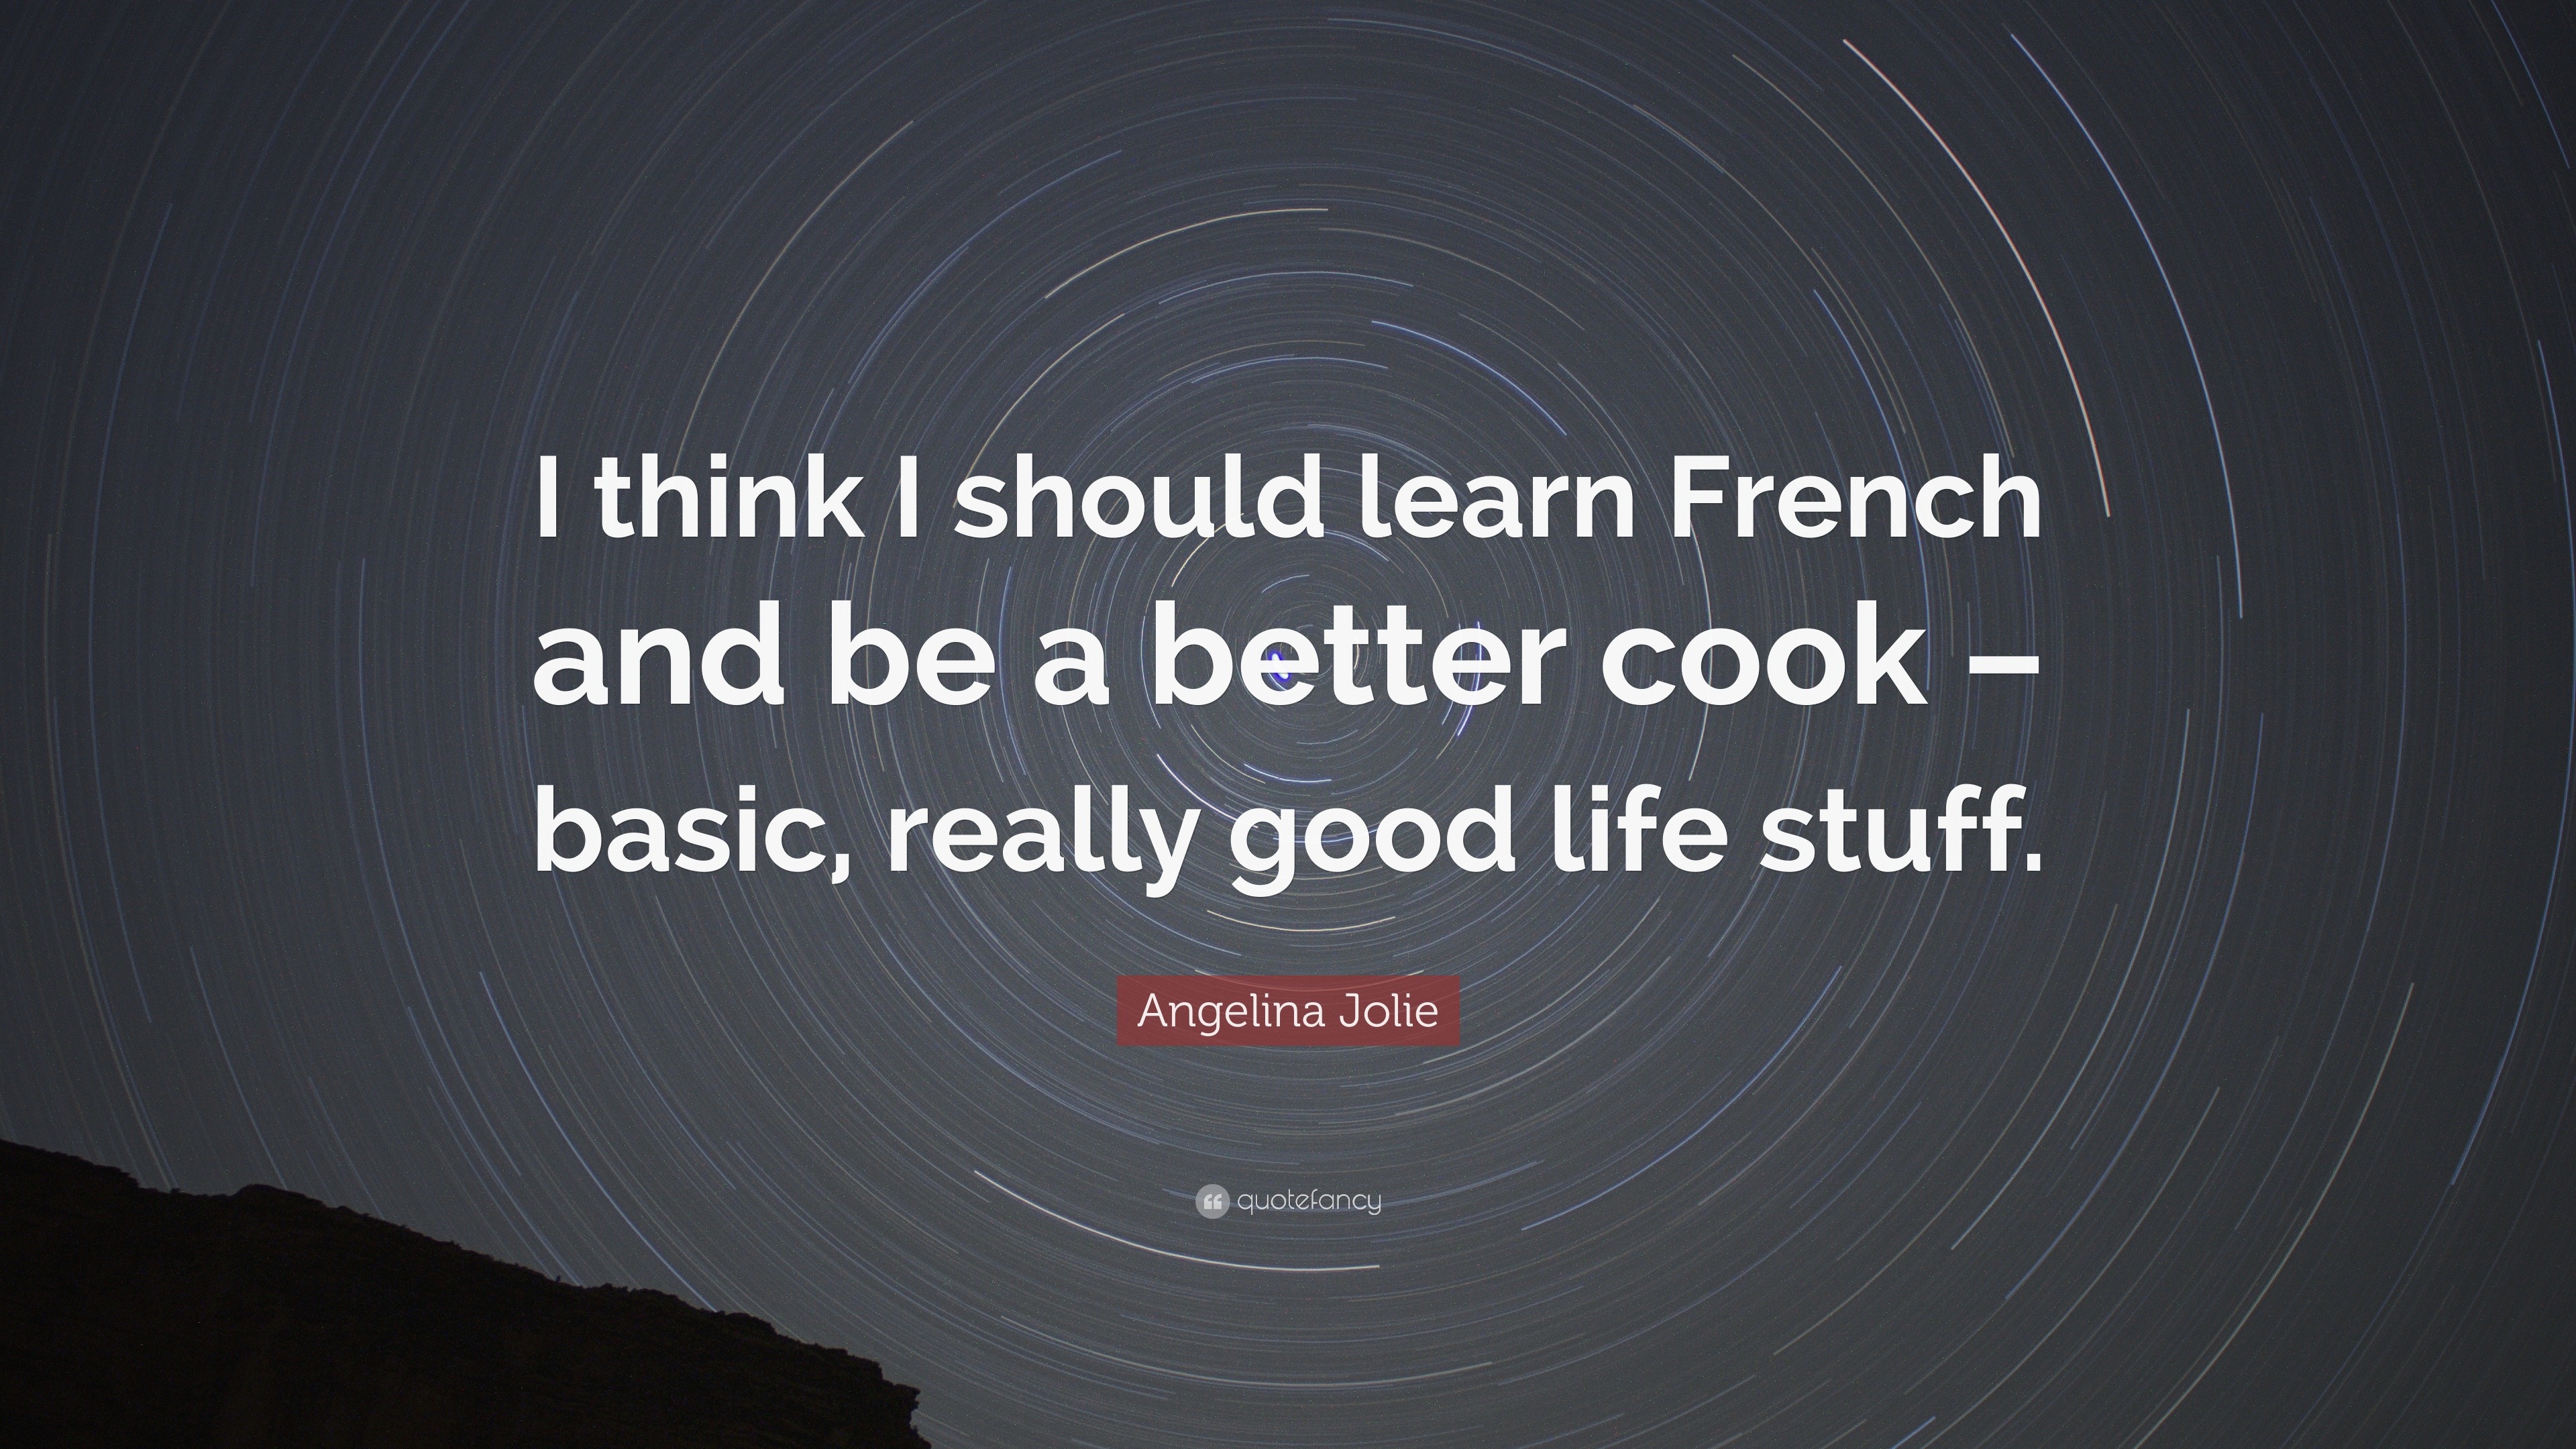 Angelina Jolie Quote “I think I should learn French and be a better cook